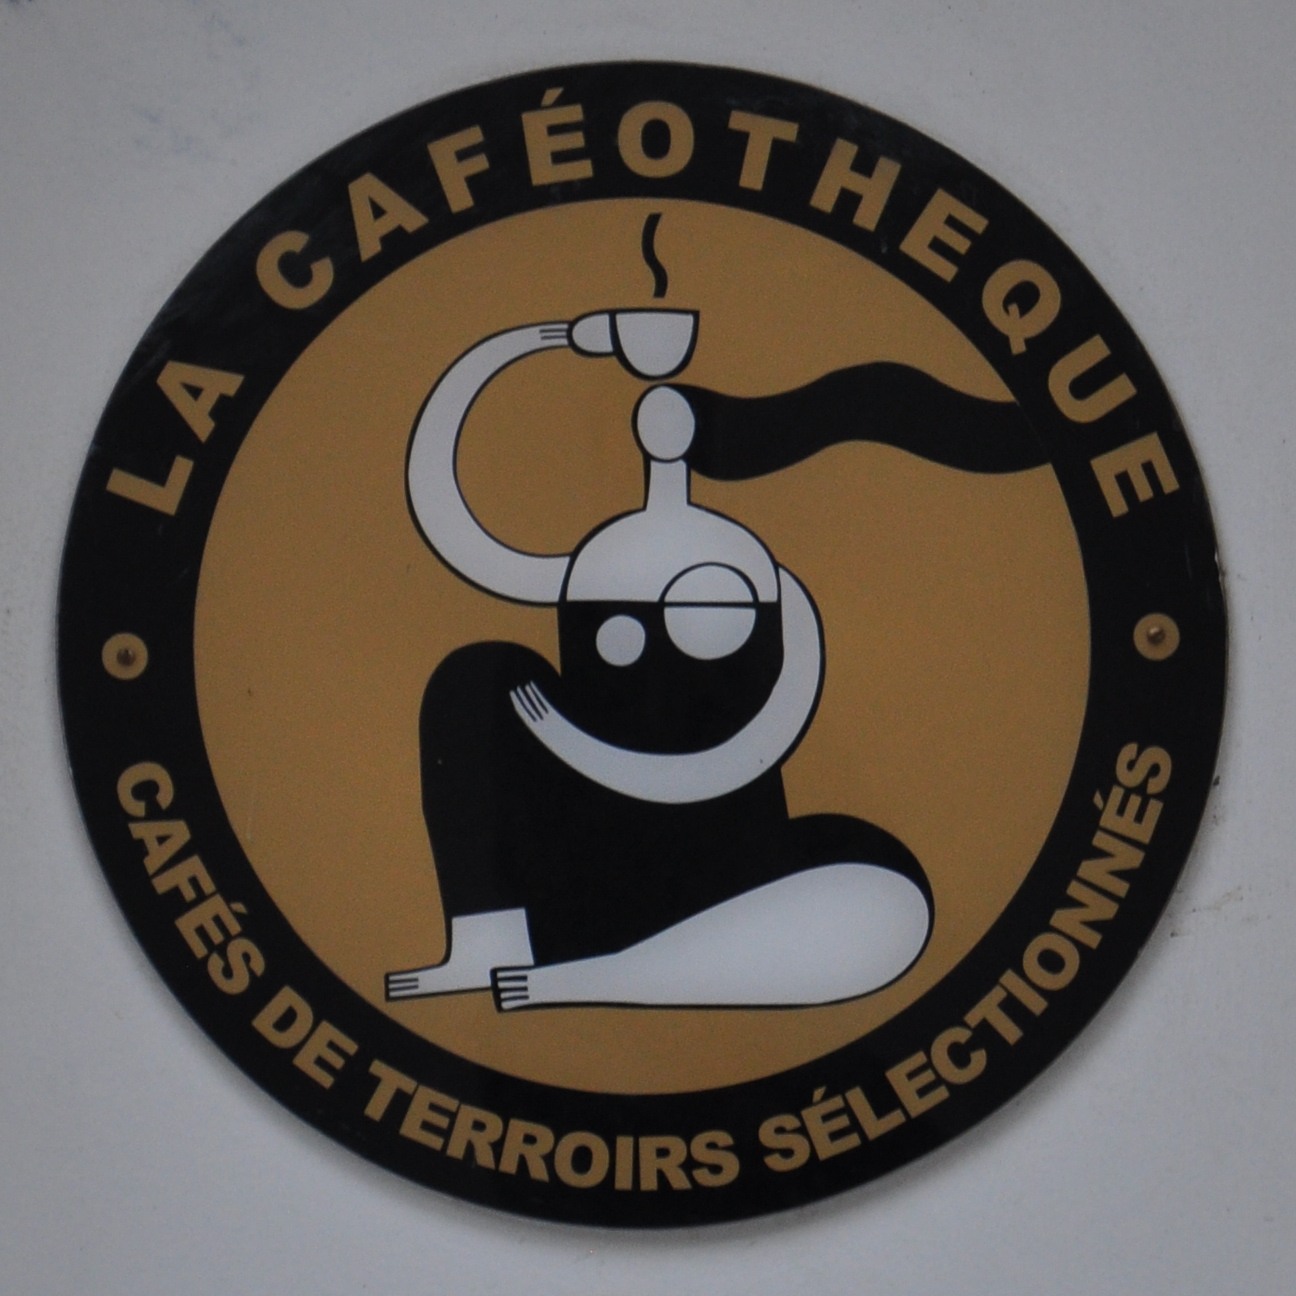 The La Caféothèque logo, a stylised picture of a woman, sitting on the floor, drawn so that her torso looks like a coffee roaster, holding an espresso cup above her head.